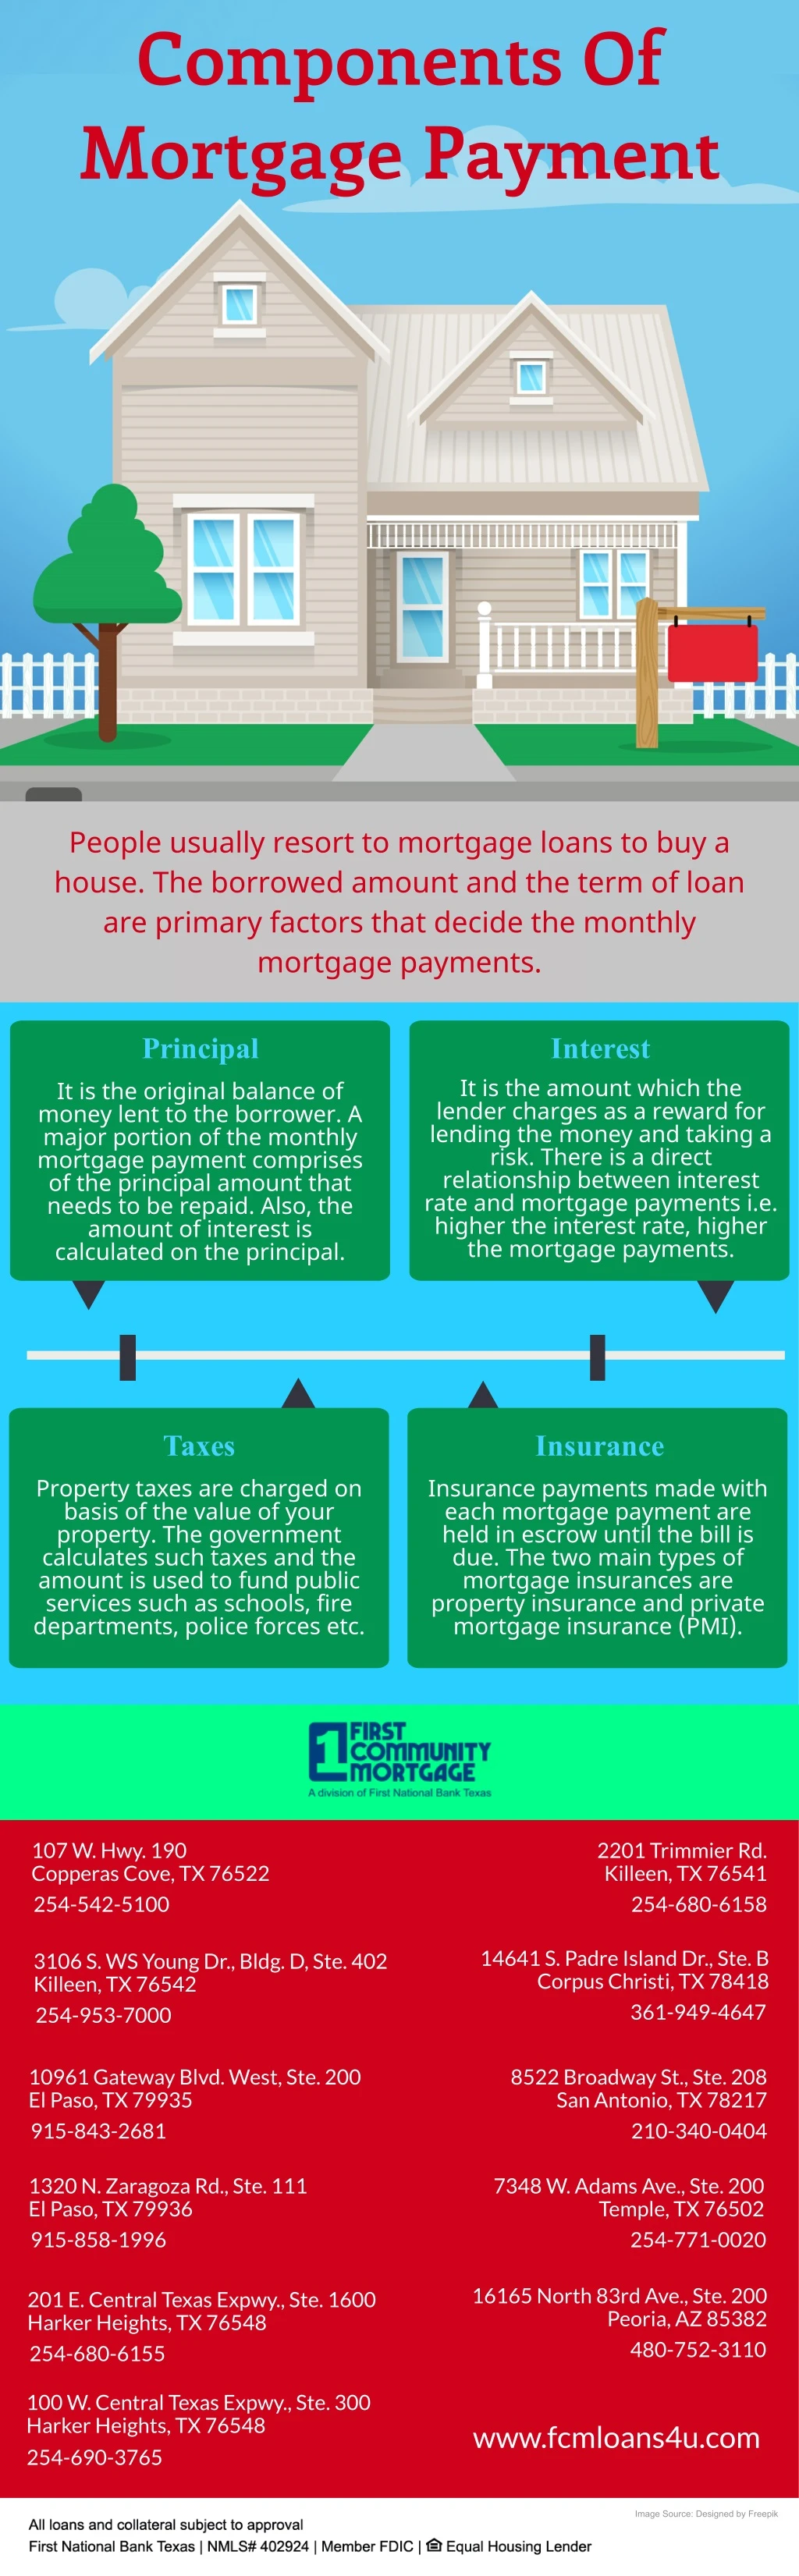 components of mortgage payment